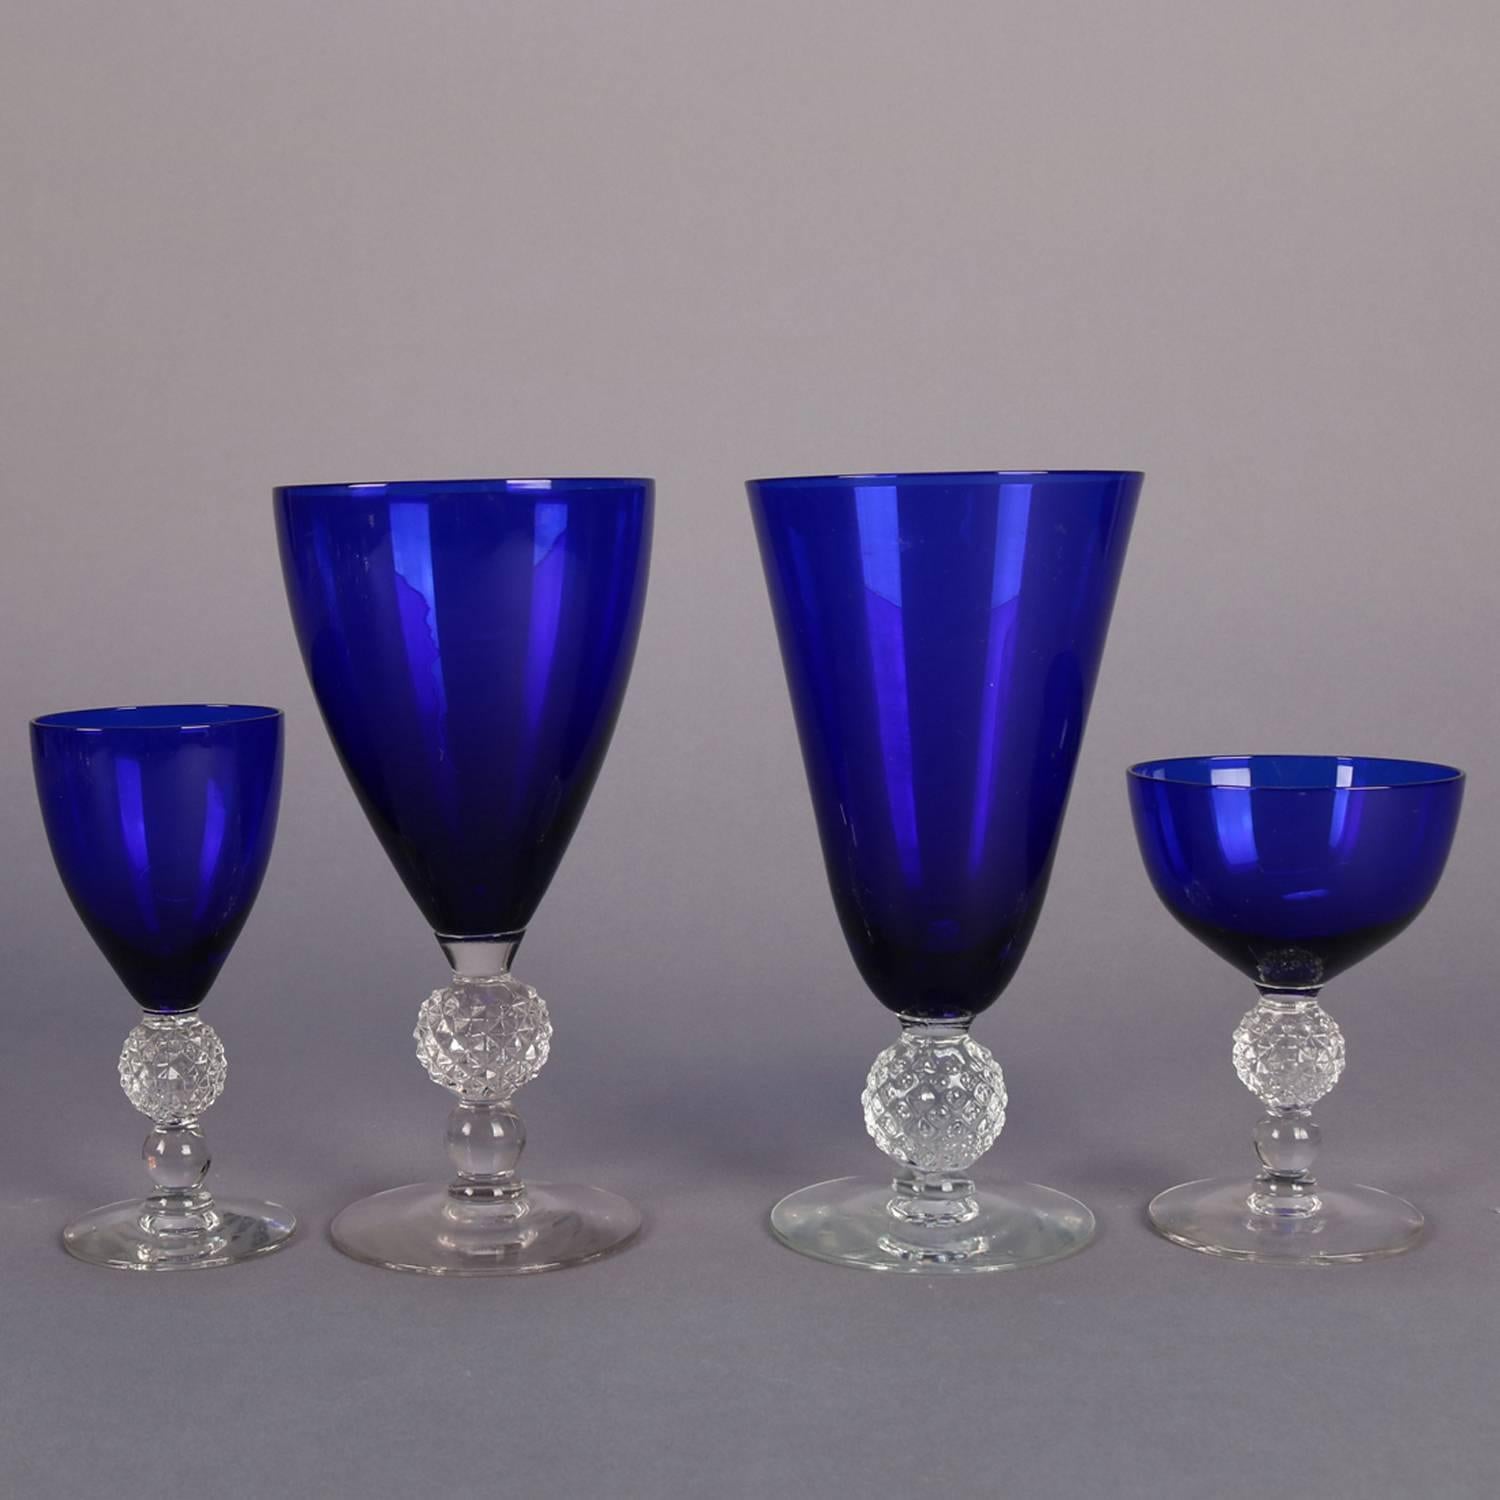 38 Piece set of Ritz Blue stemware in golf ball pattern by Morgantown Glass Company features cobalt blue glass bowls with clear crystal bases having spherical stem with diamond divots, 20th century

Measure - Water goblets 6.75